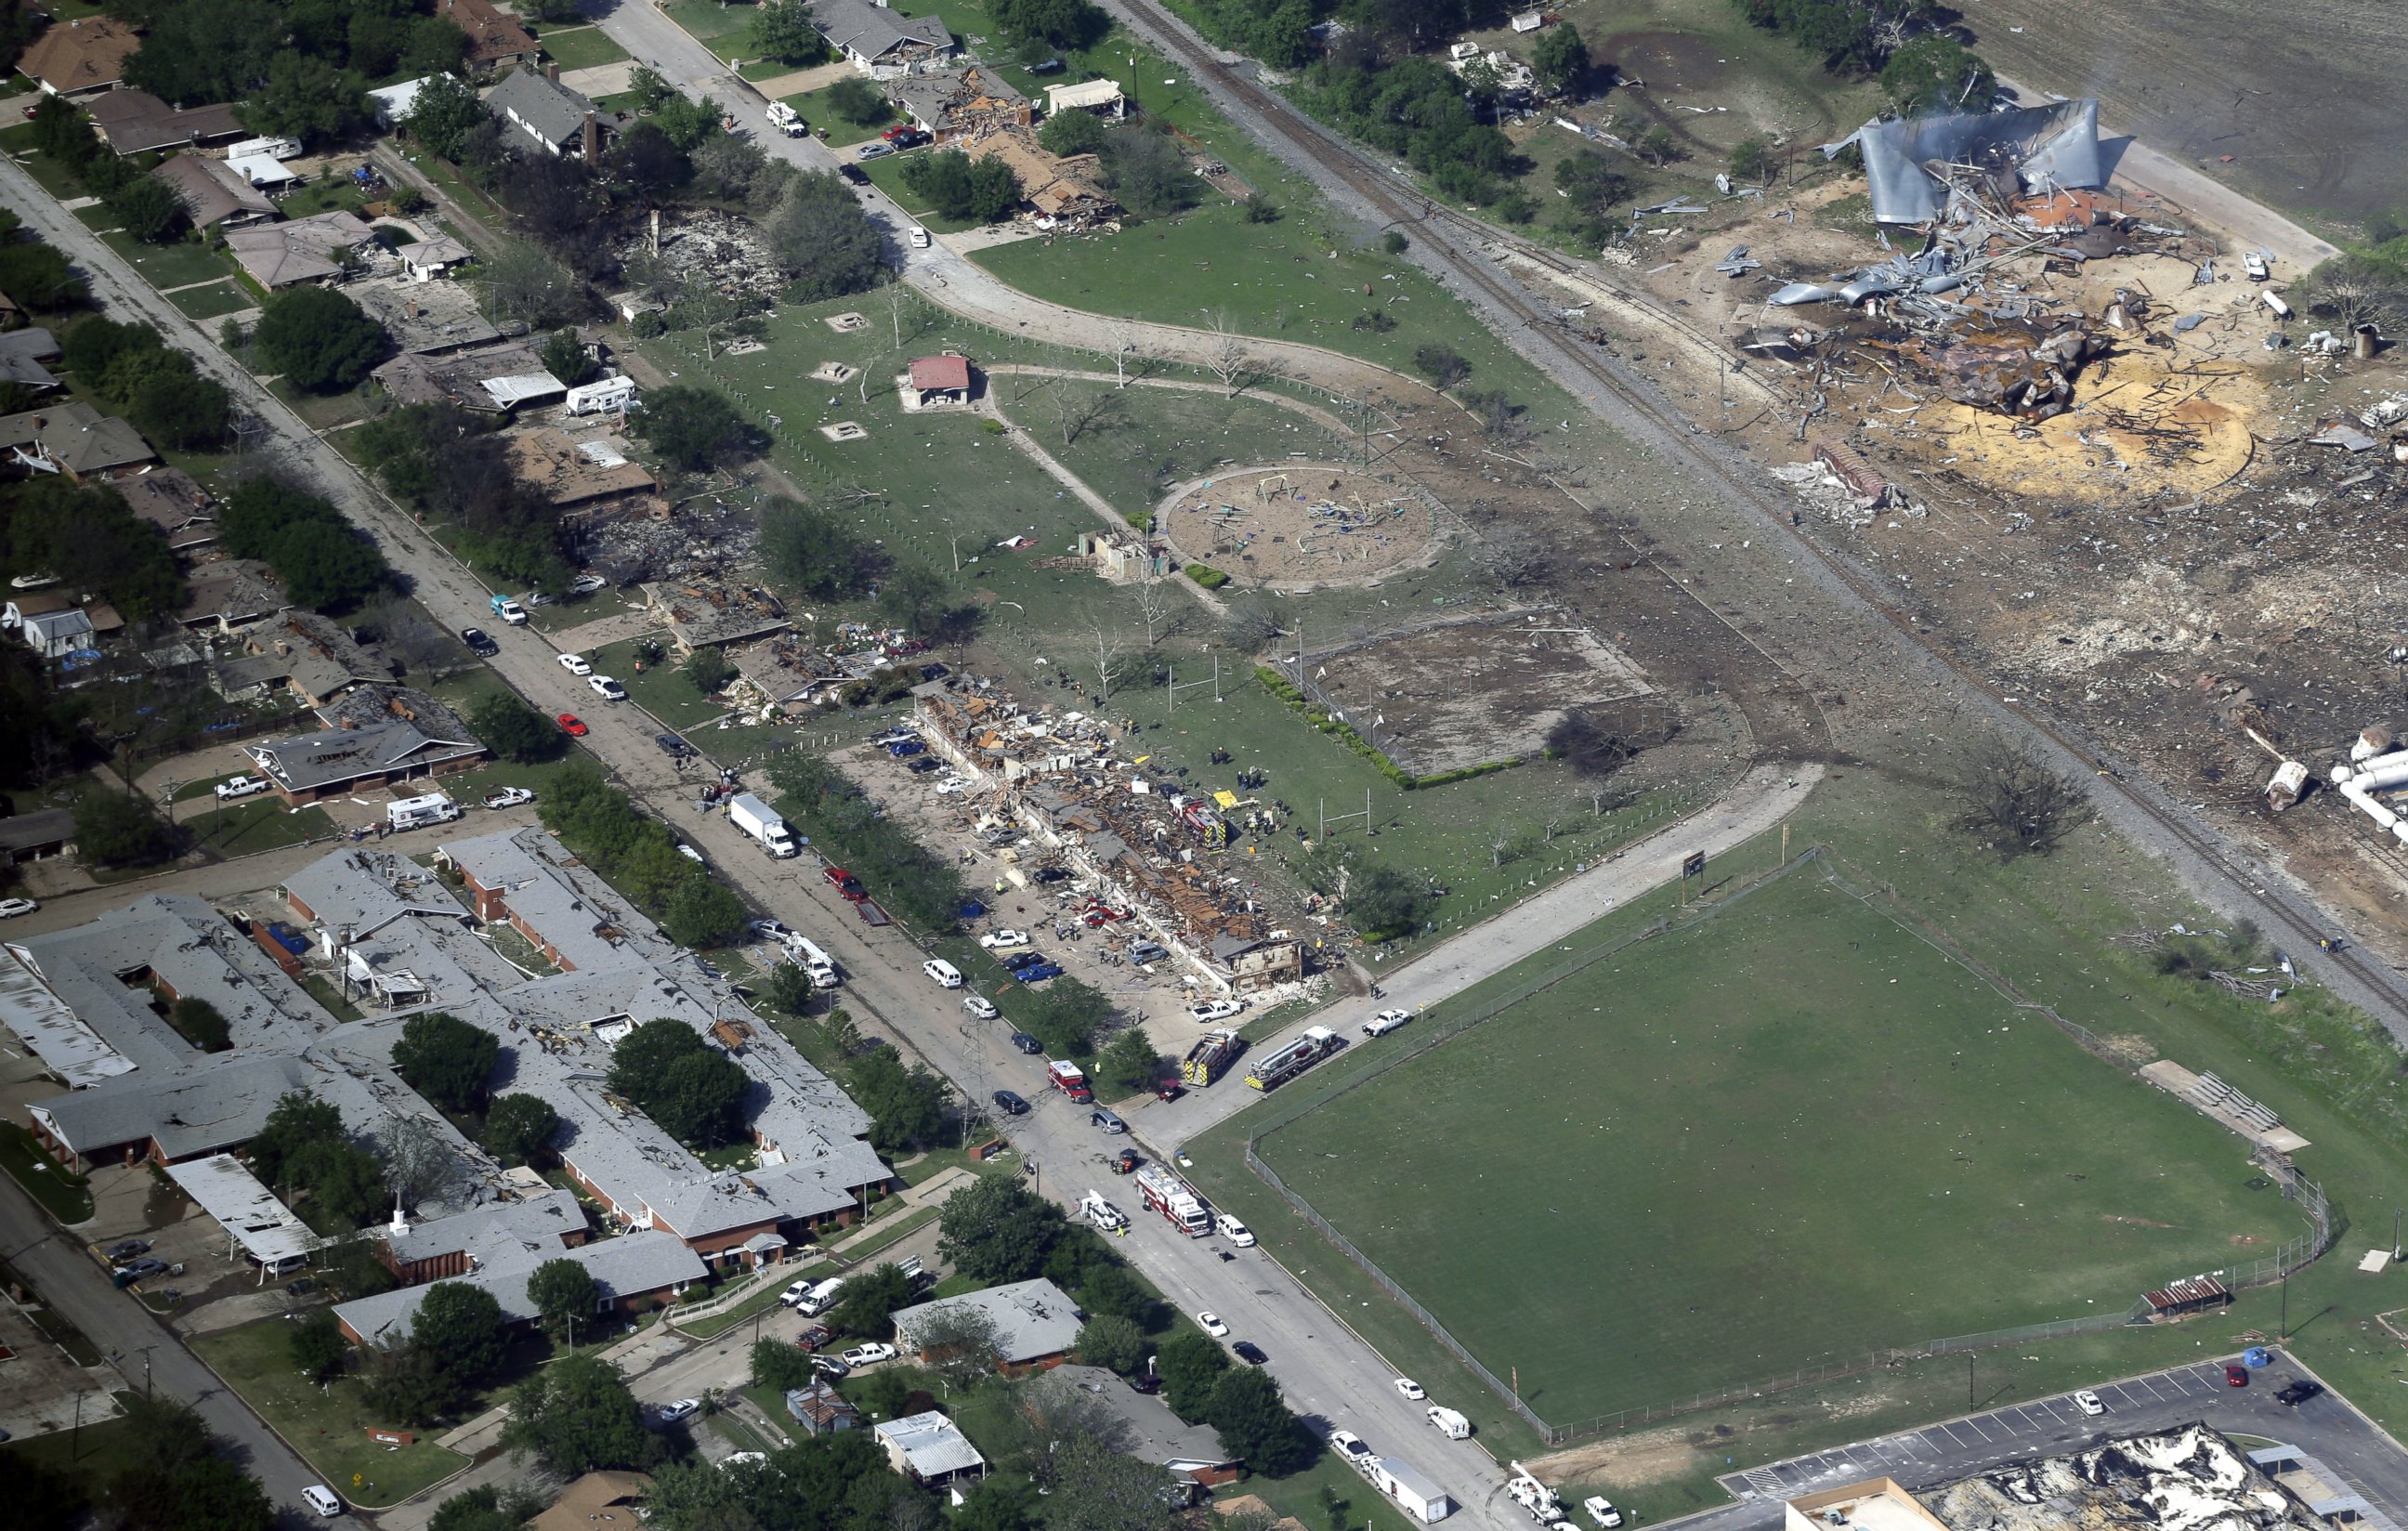 PHOTO: An April 18, 2013 aerial photo shows the remains of a nursing home, left, apartment complex, center, and fertilizer plant, right, destroyed by an explosion at a fertilizer plant in West, Texas.